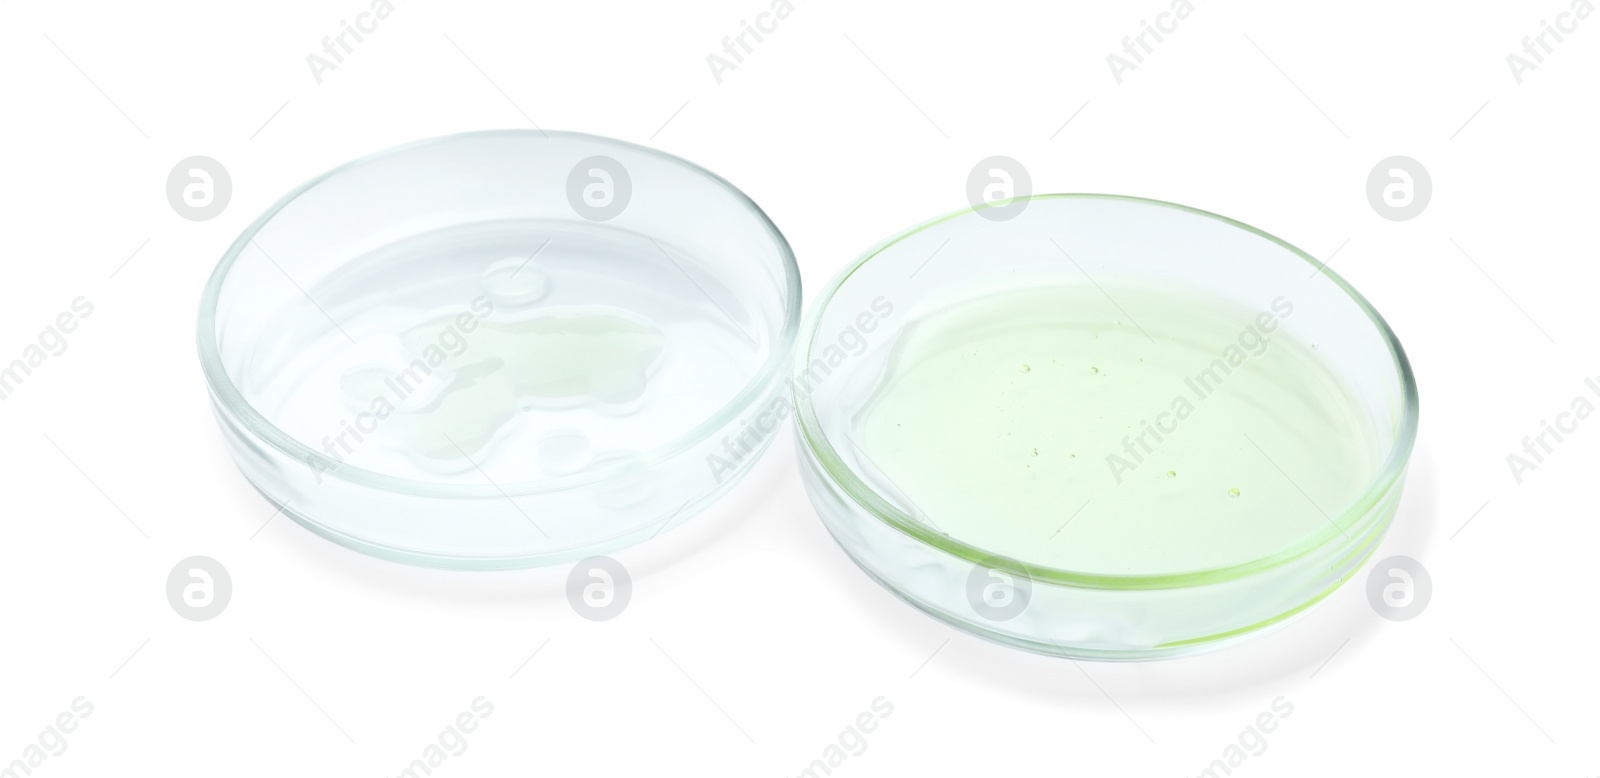 Photo of Petri dishes with different liquids on white background